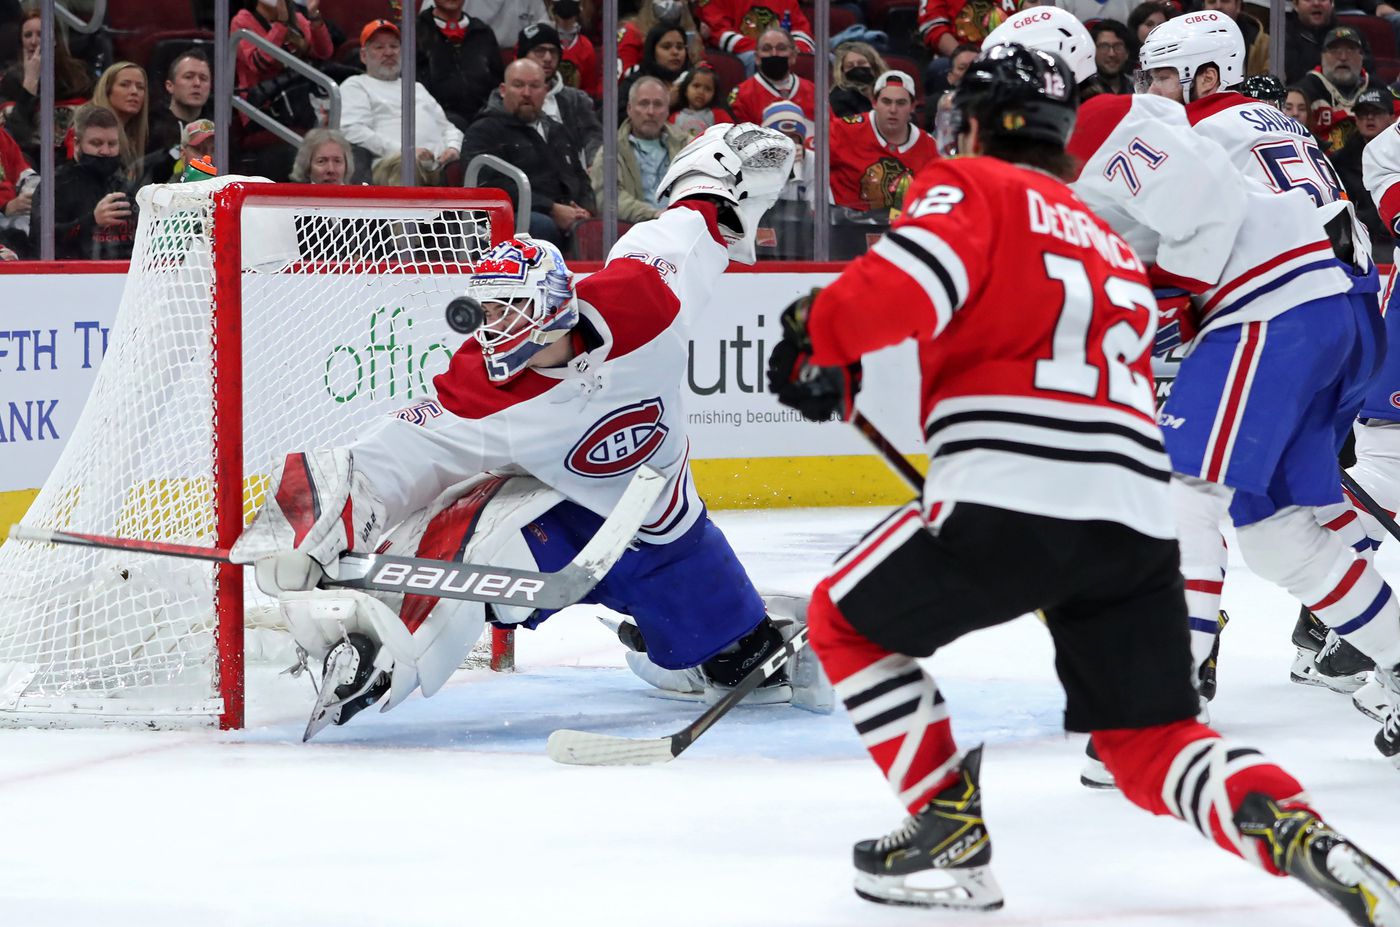 Montreal Canadiens goaltender Sam Montembeault (35) deflects a shot on goal by Chicago Blackhawks left wing Alex DeBrincat (12) in the third period at United Center on Jan. 13, 2022, in Chicago.